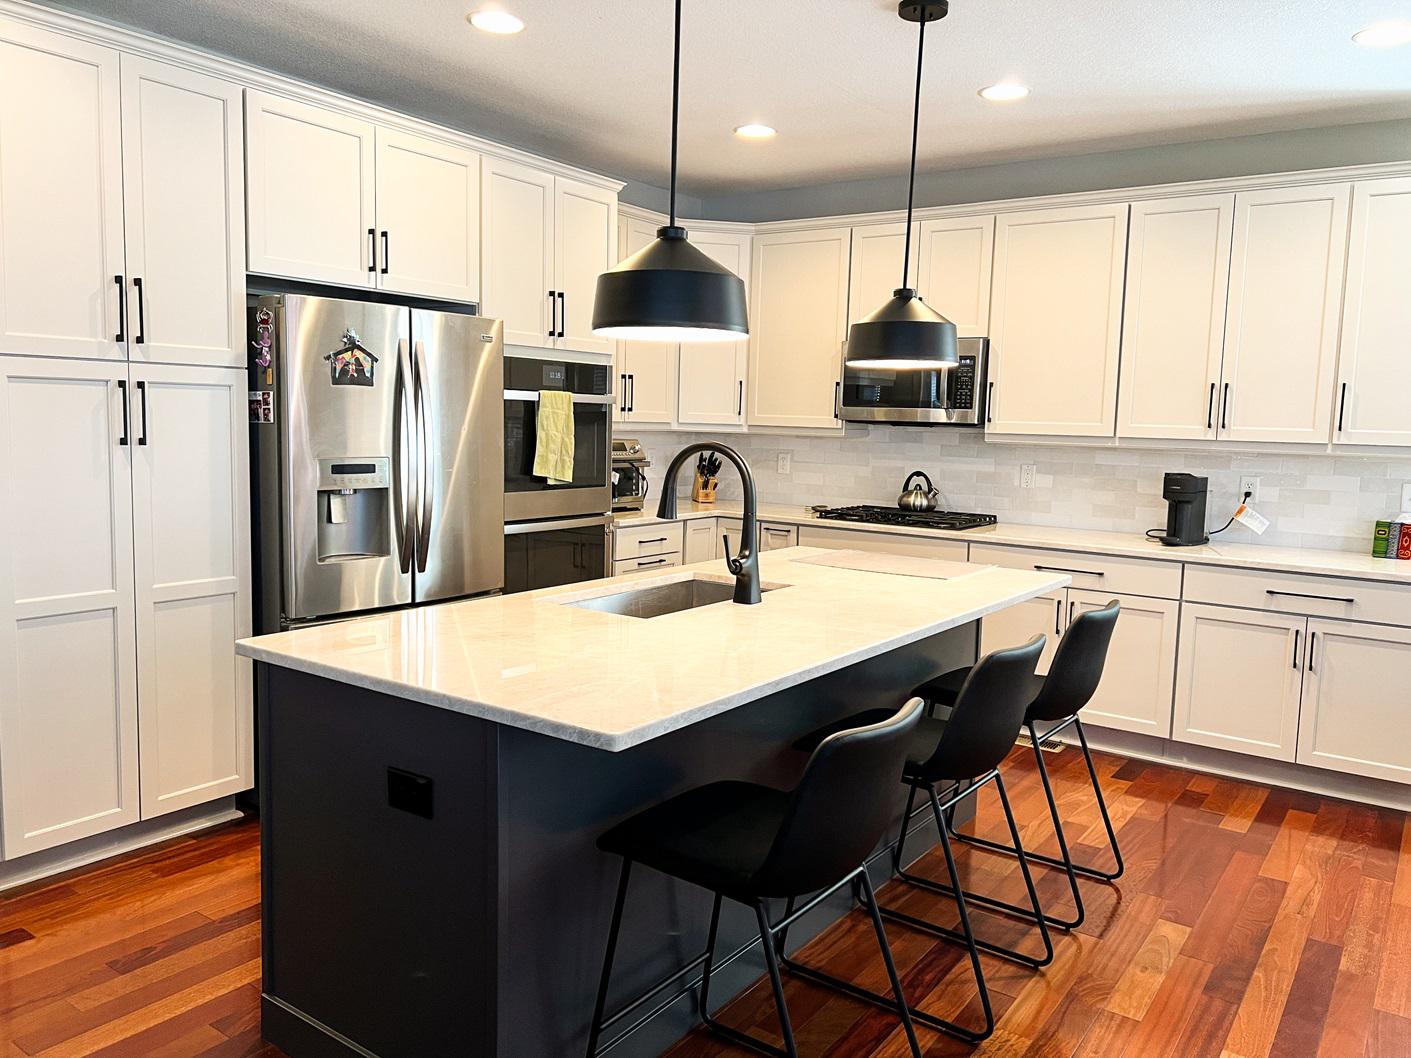 Embrace the allure of monochrome magic with our stunning black-and-white Kitchen Update! Get ready t Kitchen Tune-Up Savannah Brunswick Savannah (912)424-8907